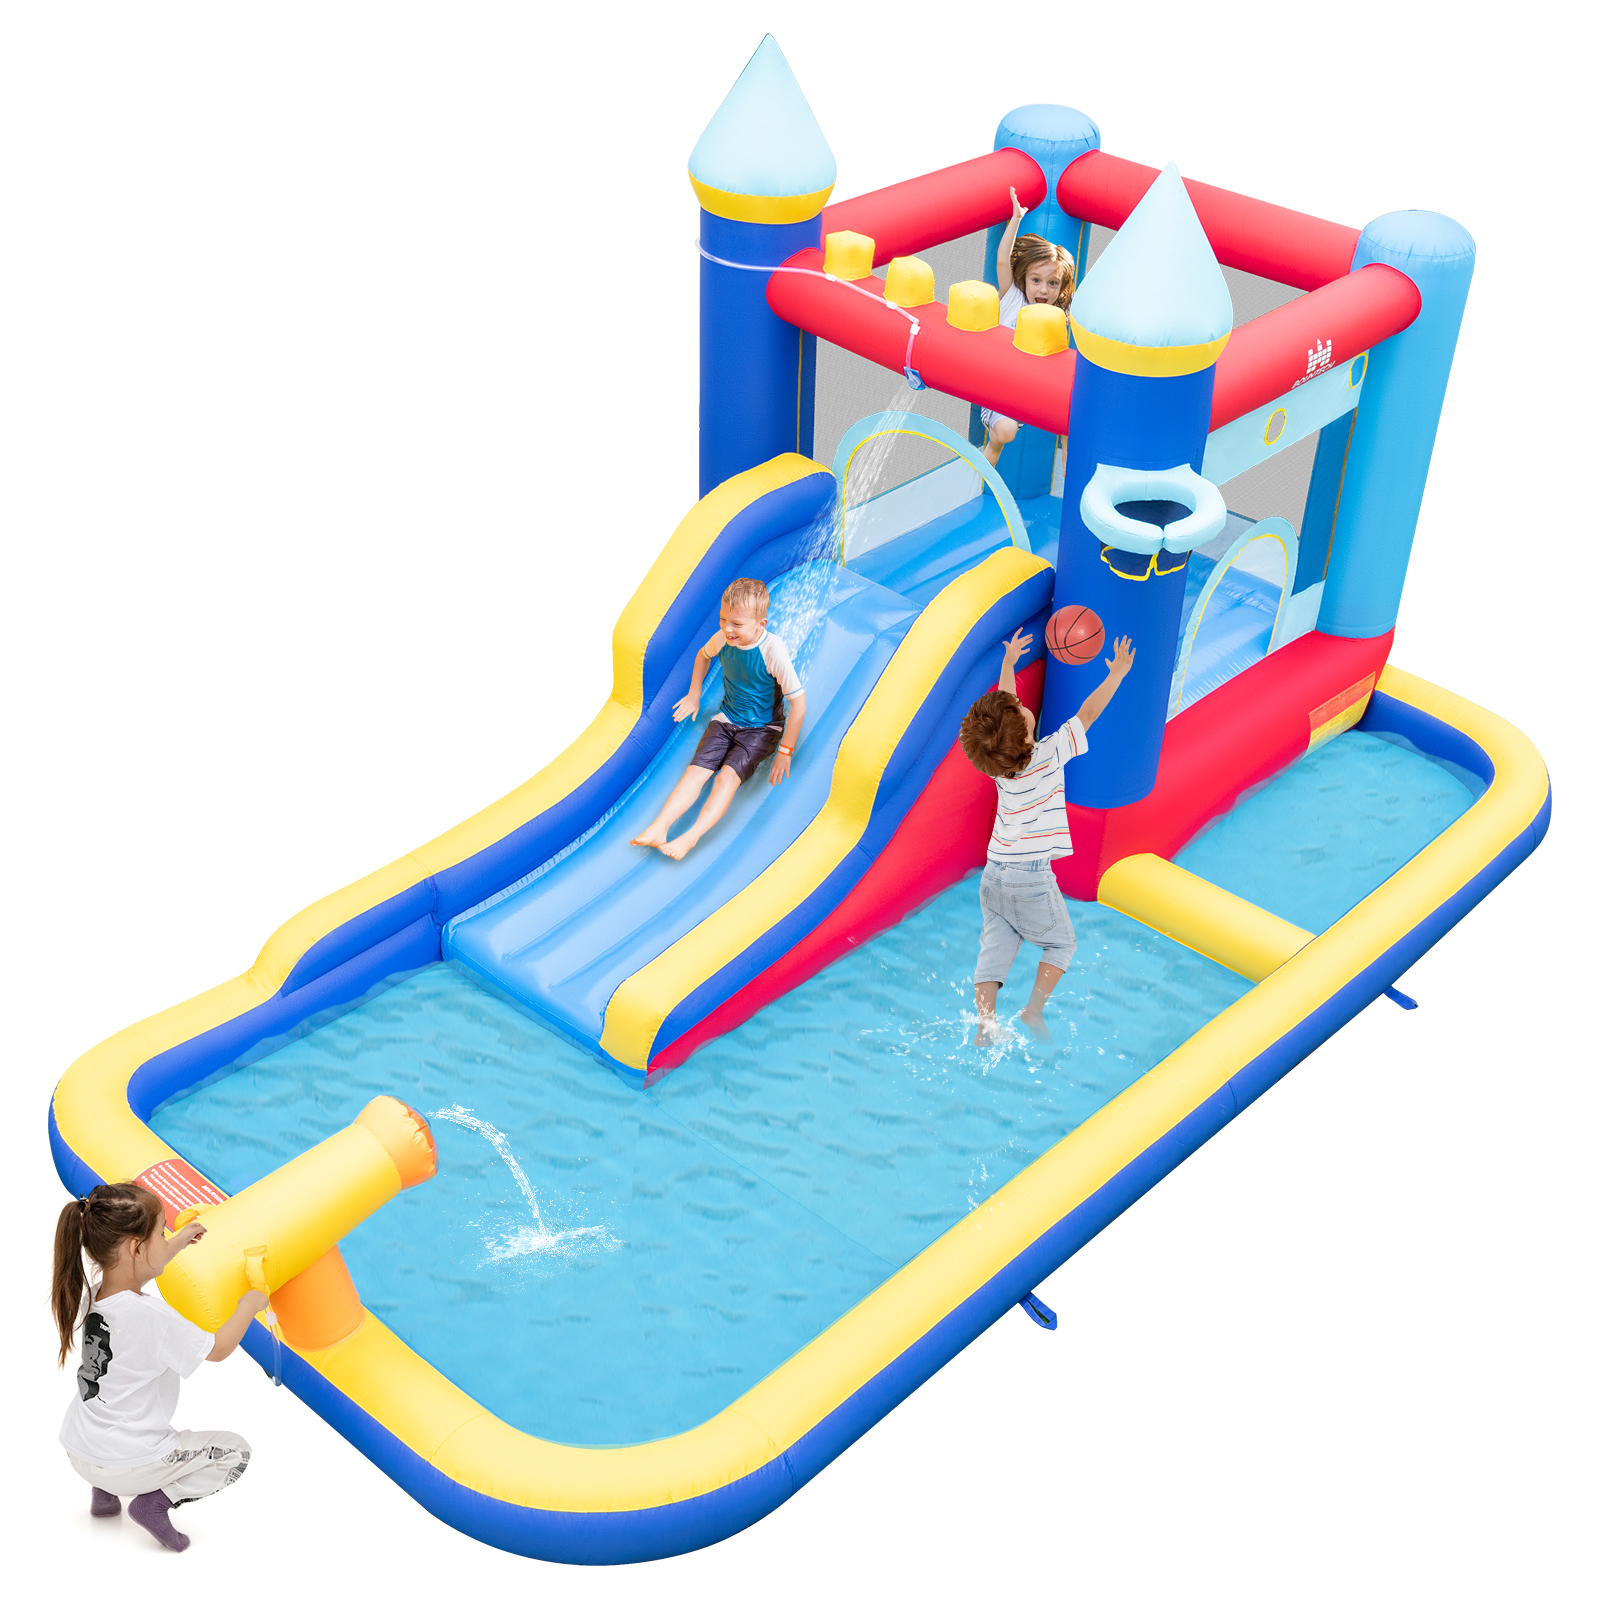 Inflatable Bounce Castle Jumping Air Bounce Castle for Kids